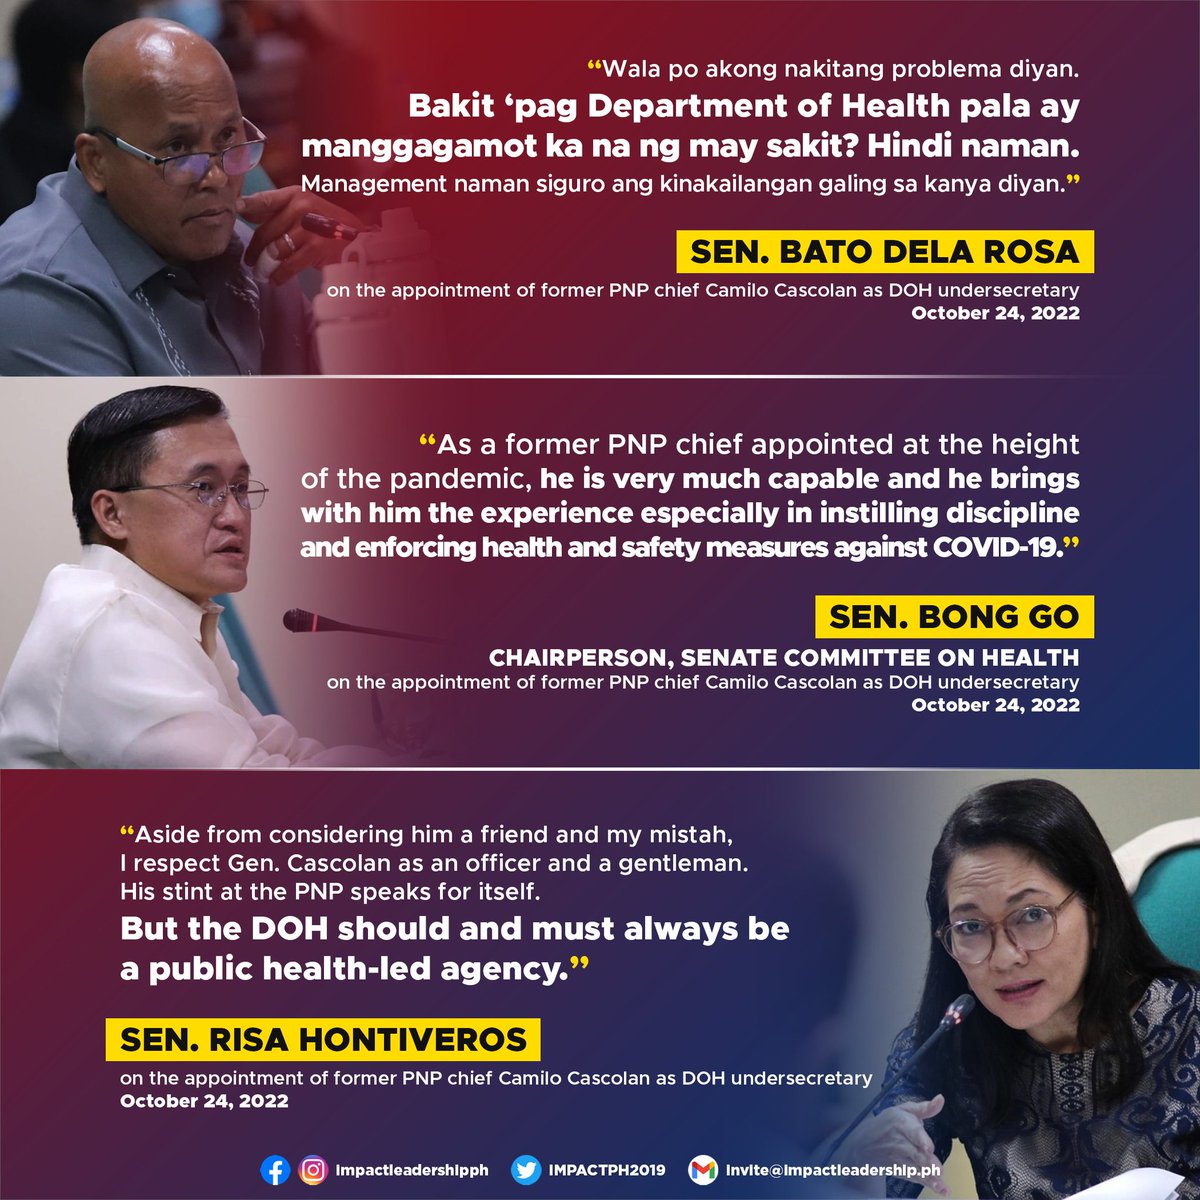 BATO, GO DEFEND CASCOLAN'S APPOINTMENT TO DOH In separate statements, Bato dela Rosa and Bong Go defend former PNP chief Camilo Cascolan's appointment as DOH undersecretary. Meanwhile, Sen. Risa Hontiveros says 'the DOH should and must always be a public-health lead agency'.